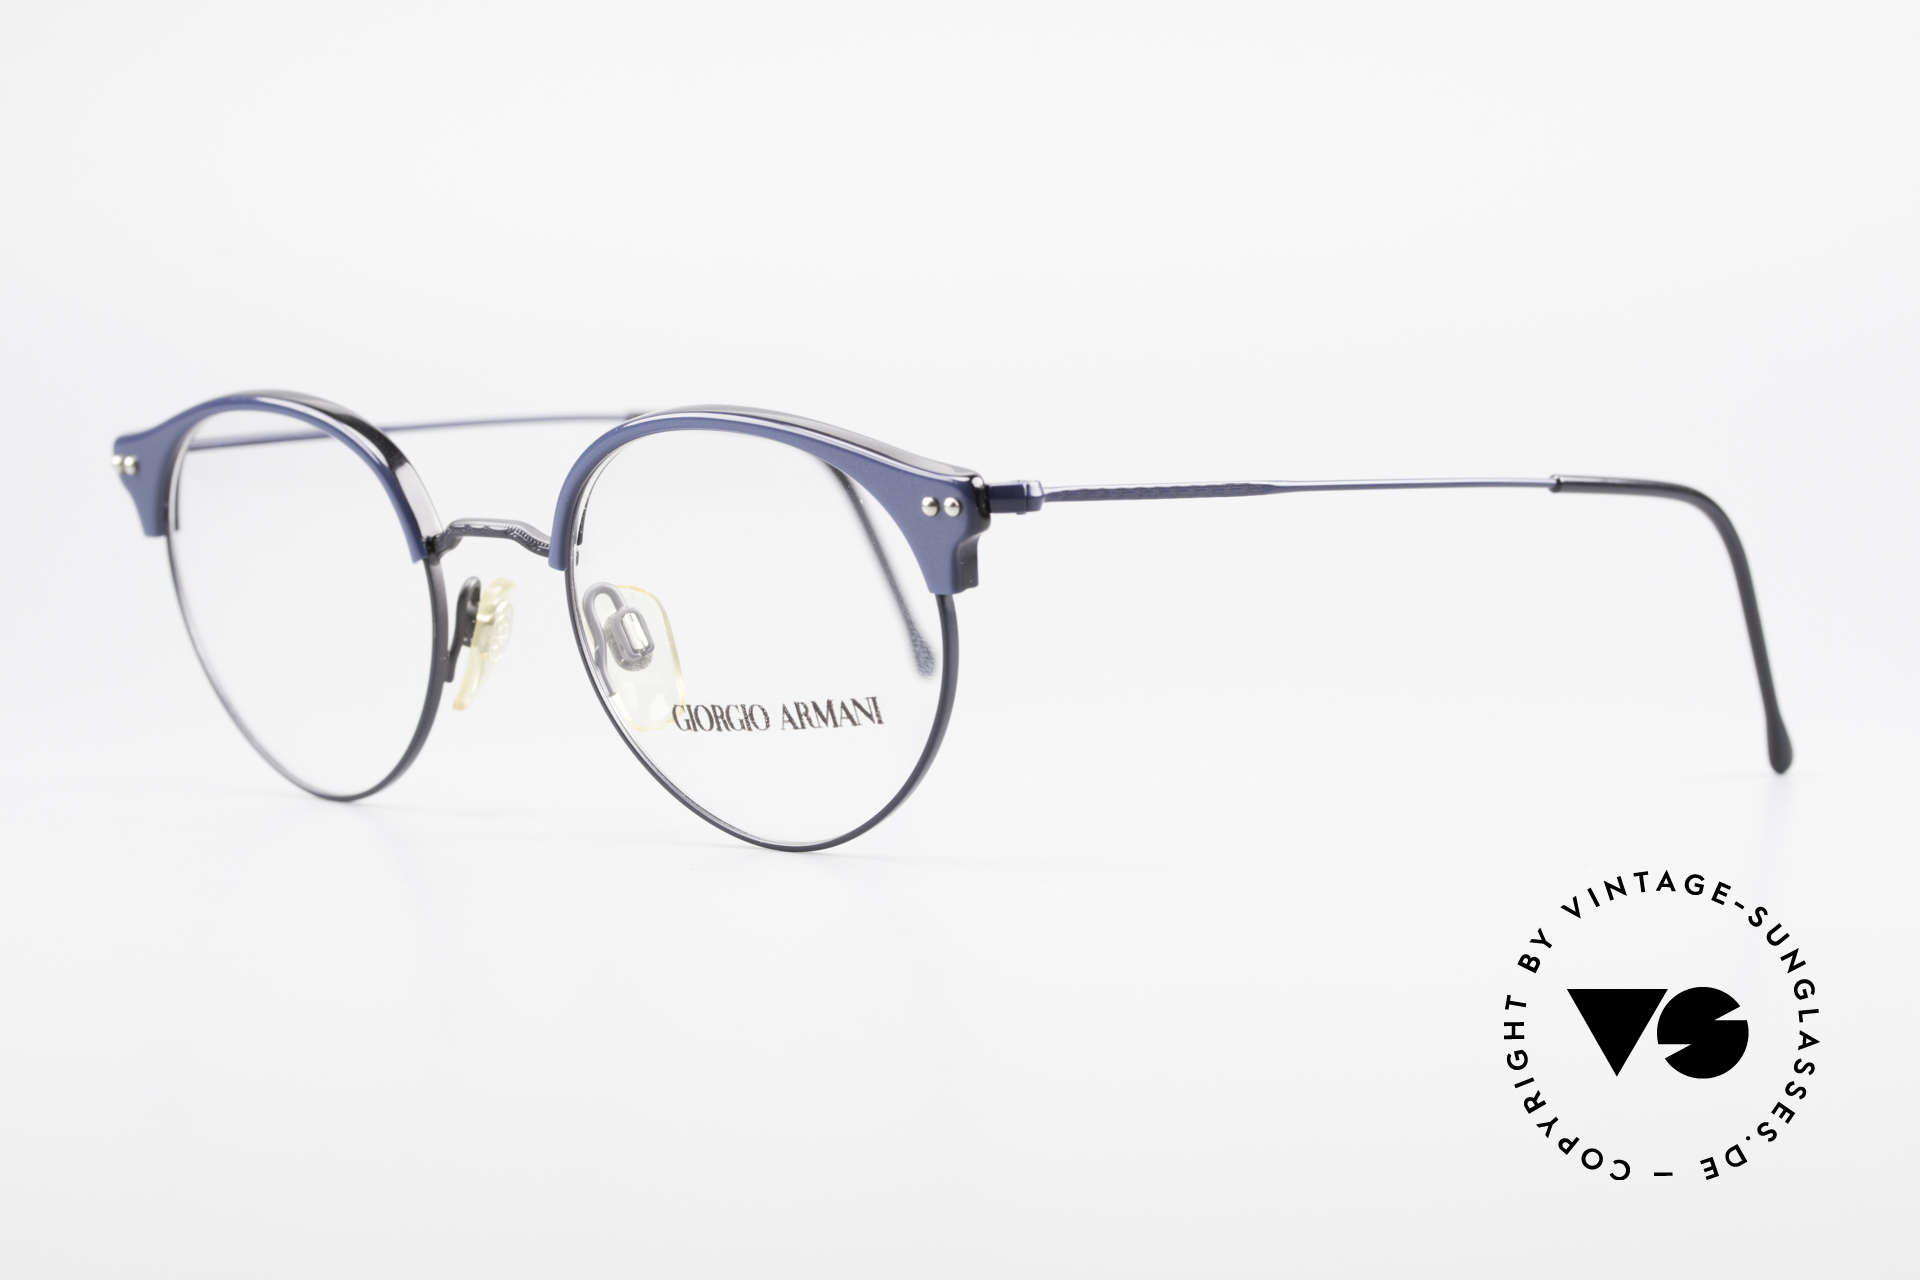 Giorgio Armani 377 90's Panto Style Eyeglasses, very interesting frame finish in deep-blue metallic, Made for Men and Women